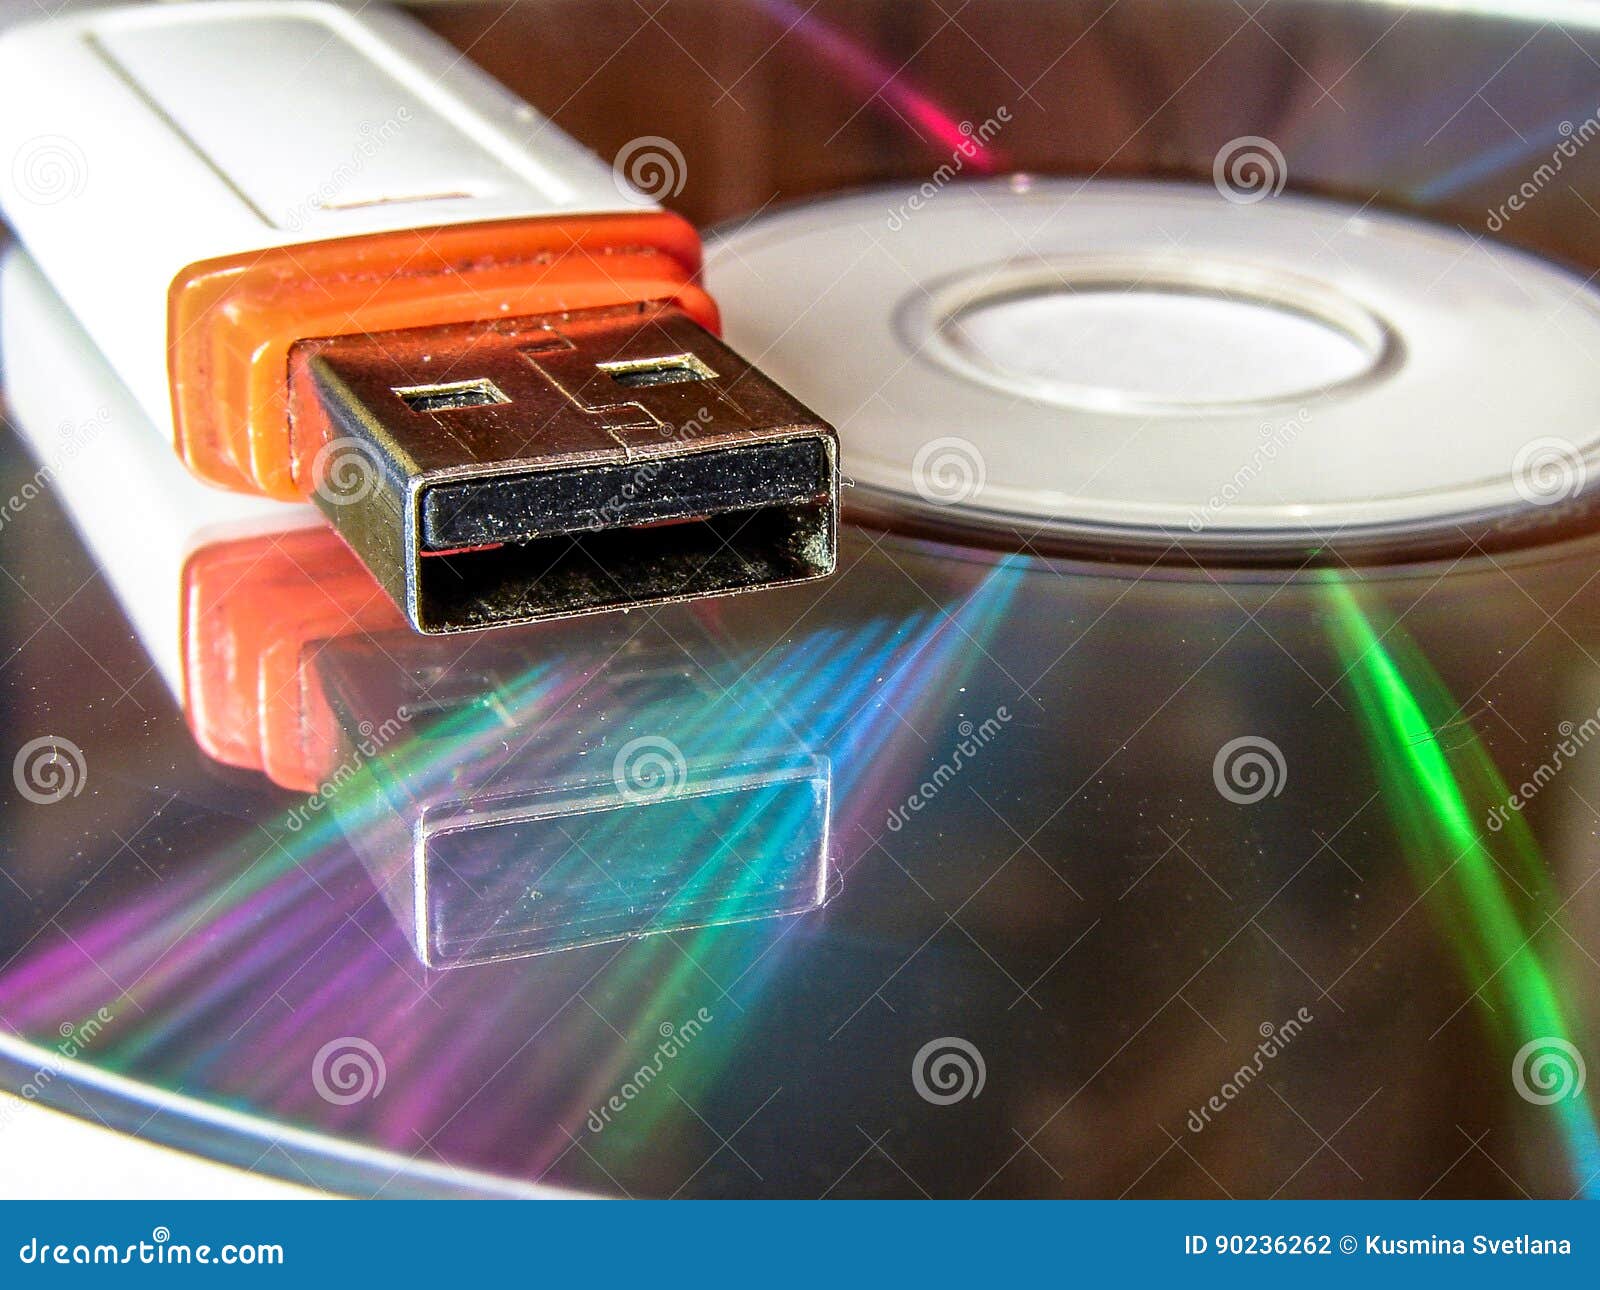 copy music from a cd to a usb flash drive